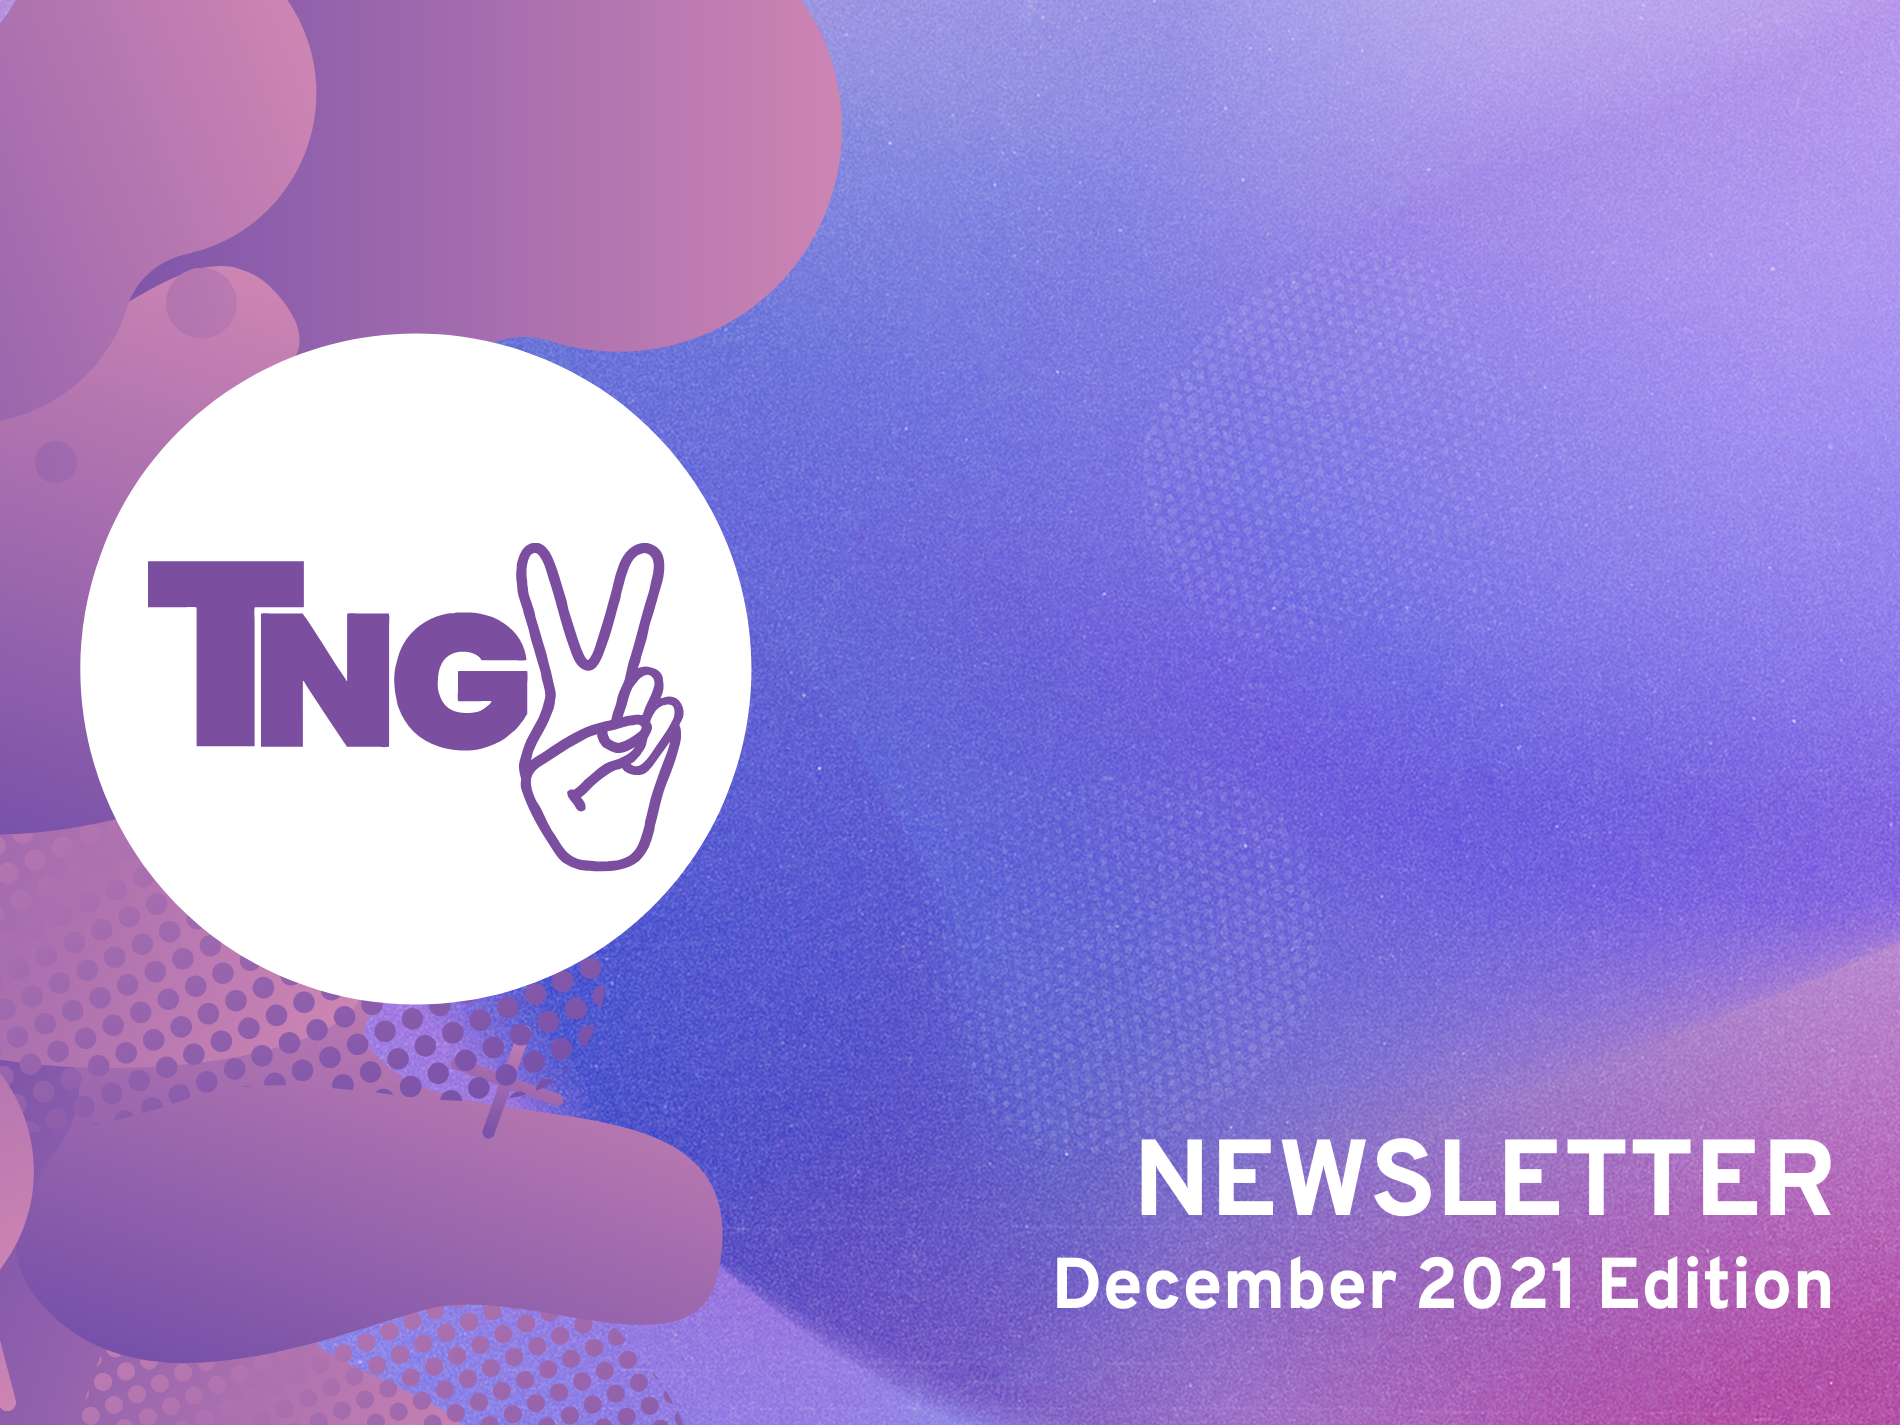 Thumbnail for blog post with title "December 2021 Newsletter" 